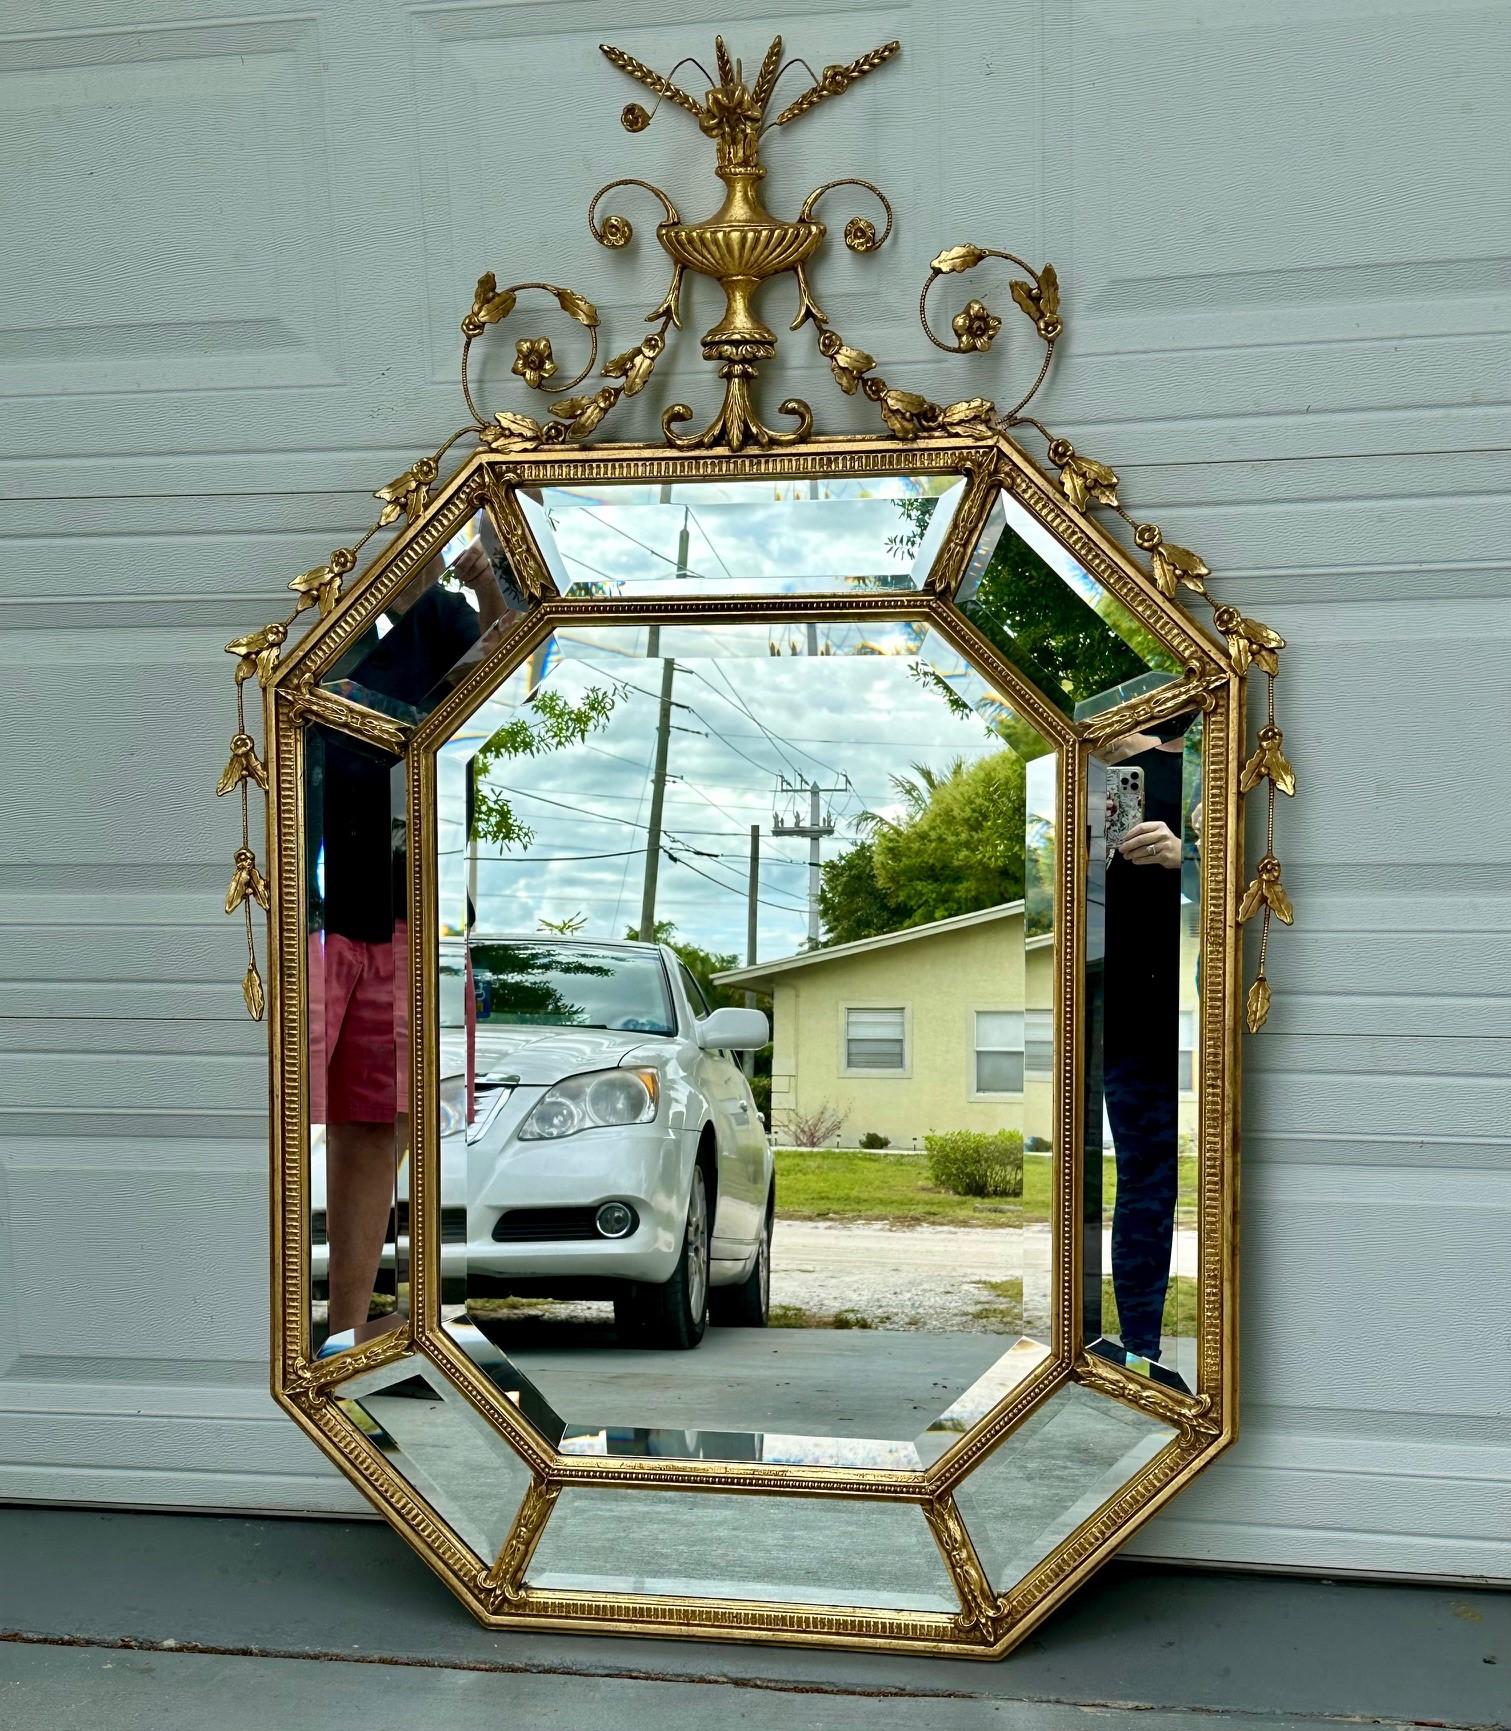 Large Adams Style Carved Giltwood Octagonal Wall Mirror.

Glamorous, carved, gilded and beveled octagonal wall mirror. This decorative mirror is made of wood and gesso with an intricate design in the style of Adams. The surround is created with 8